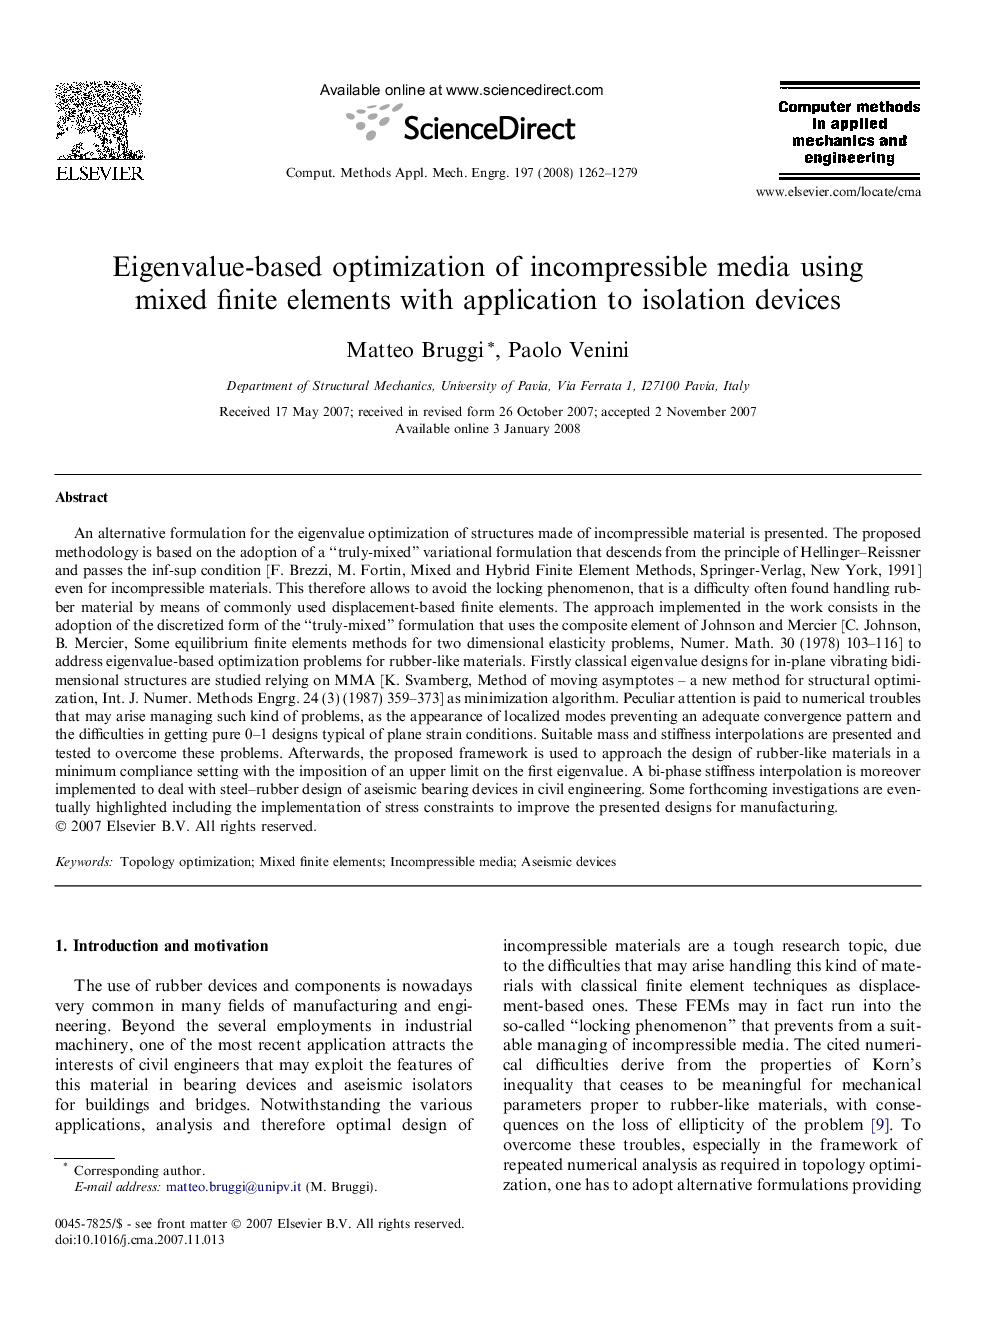 Eigenvalue-based optimization of incompressible media using mixed finite elements with application to isolation devices